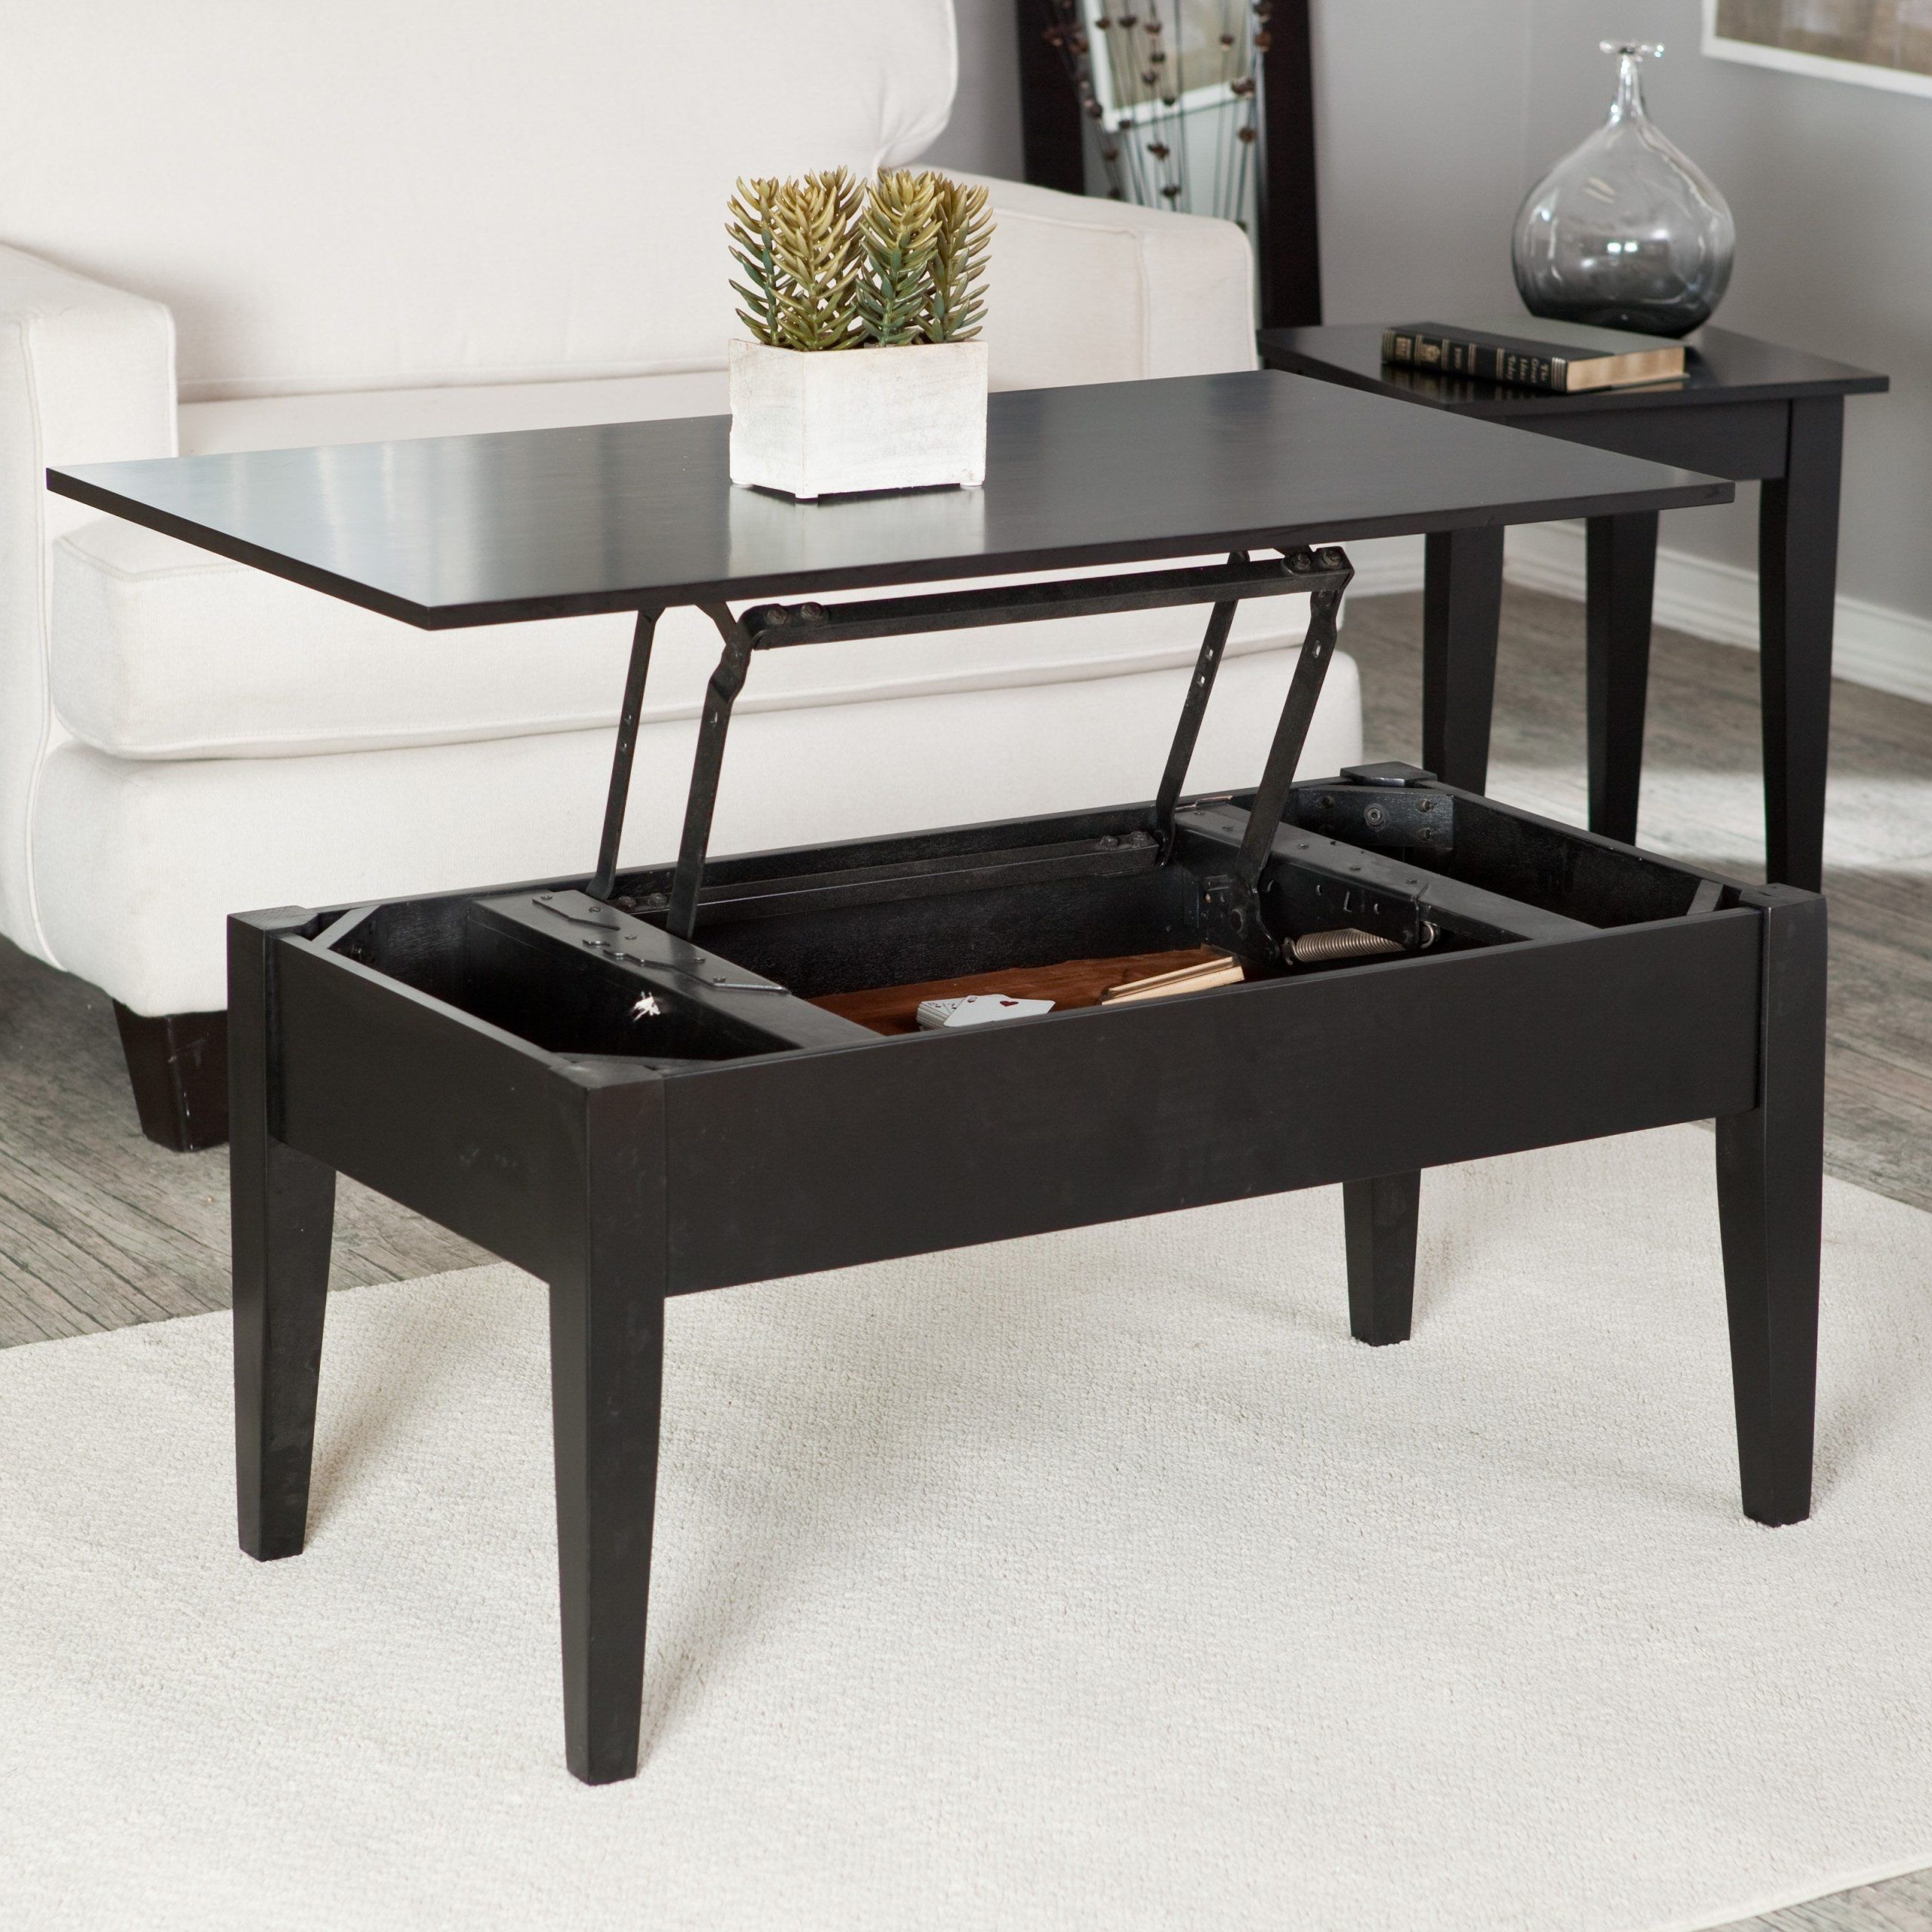 Coffee Table That Top Lifts Up | Black Coffee Tables, Coffee Table With High Gloss Lift Top Coffee Tables (Gallery 18 of 21)